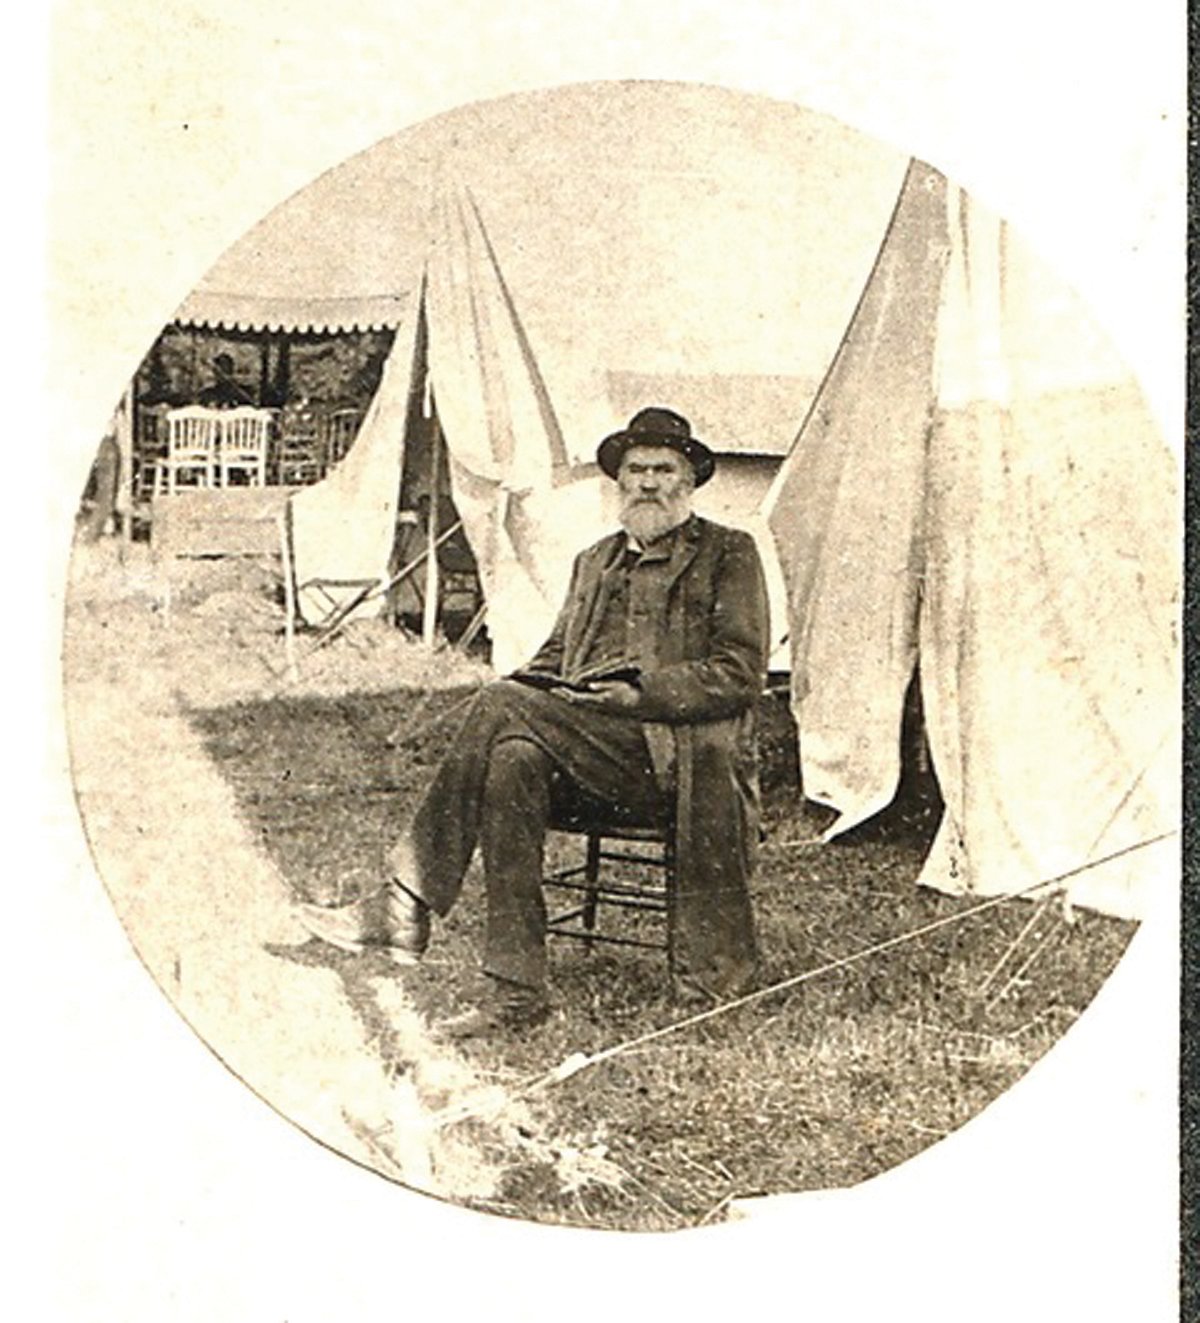 MAN OF GOD? After he was diagnosed with consumption, Frederick A. ‘Big Shang’ Bailey held camp meeting revivals at his property, and spoke at many other religious gatherings.